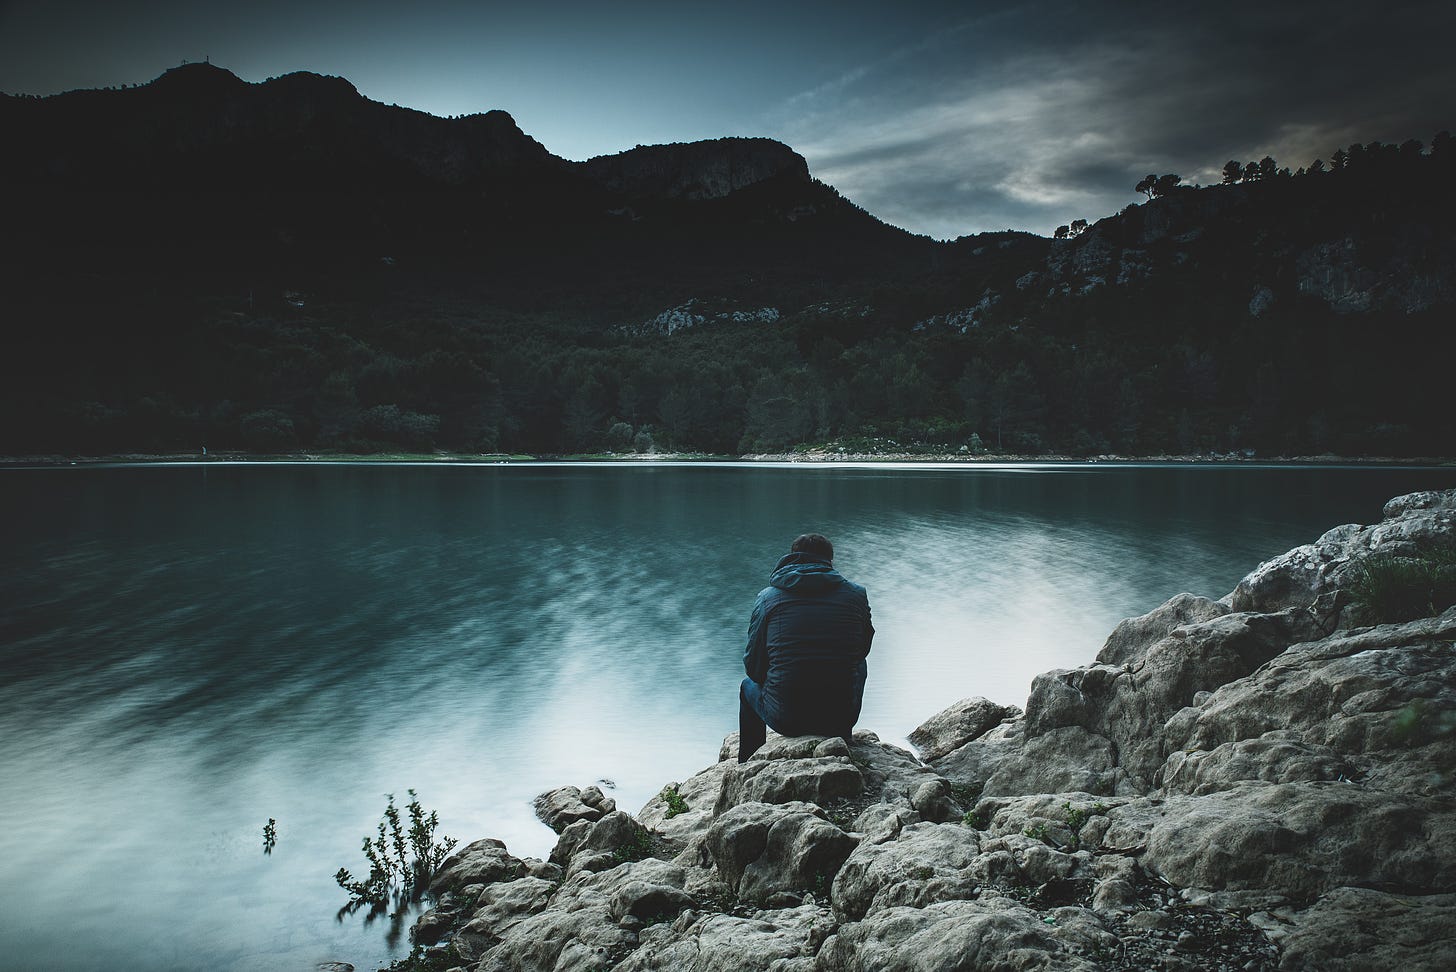 A man in a blue jacket sits on a rock ledge overlooking a lake. In the background are dark mountains.